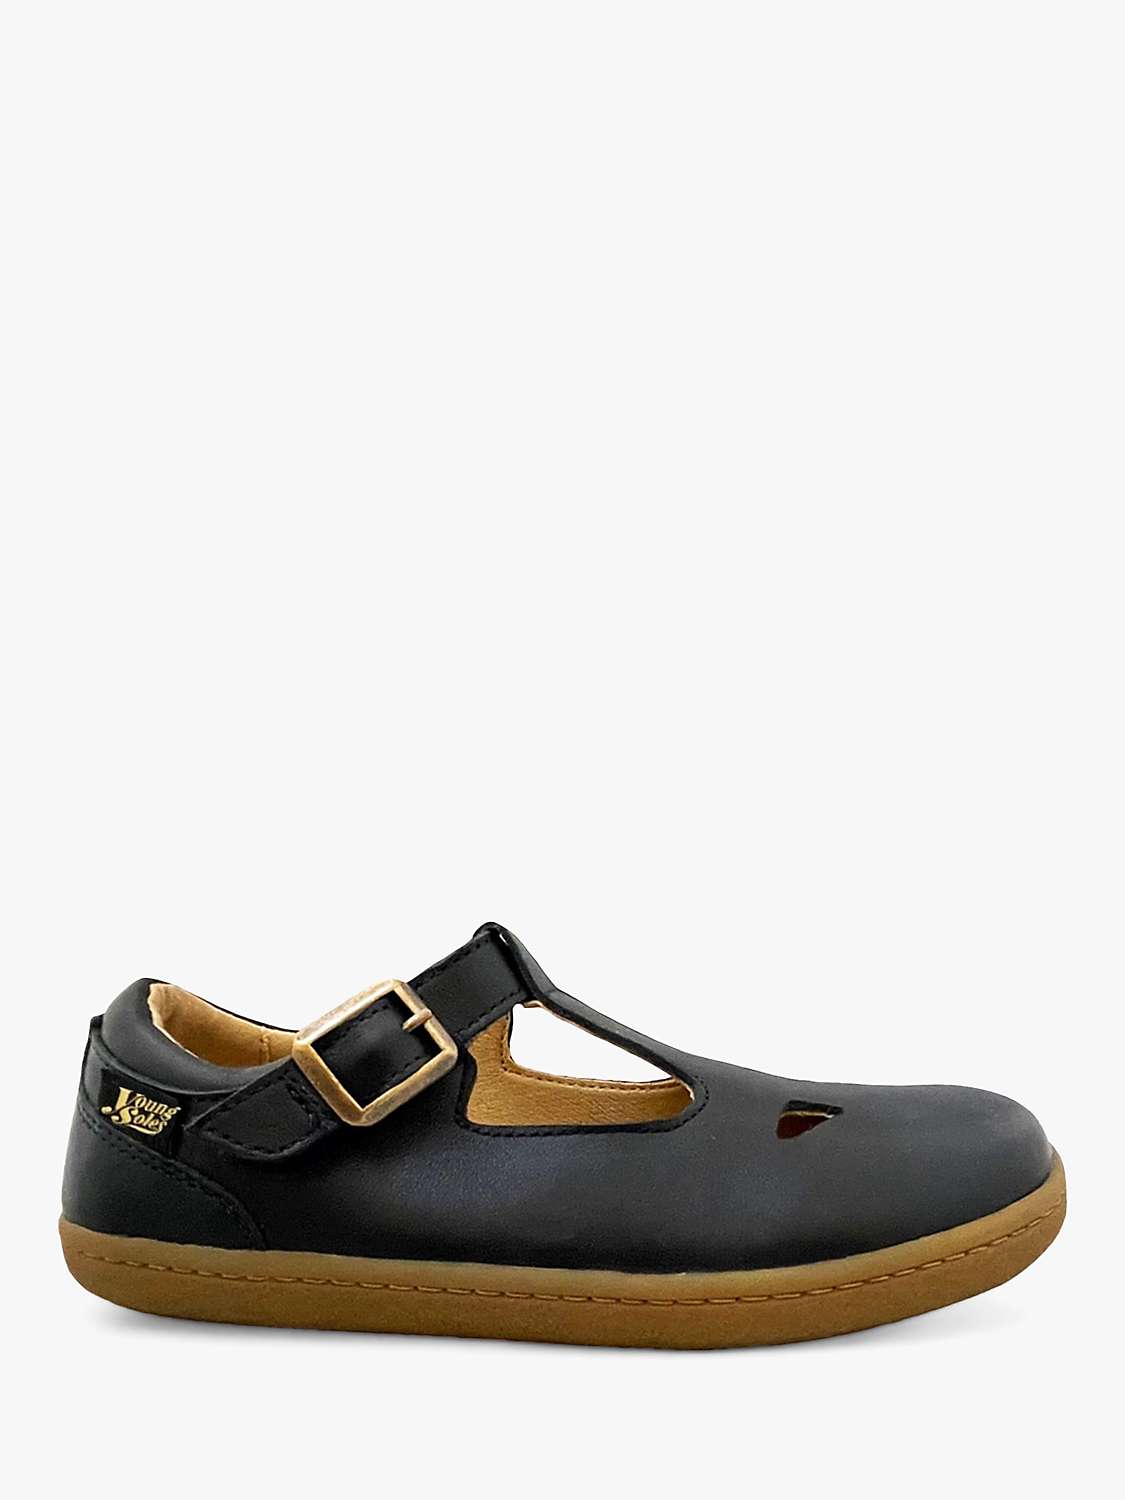 Buy Young Soles Kids' Leather Darcey T-Bar Shoes, Navy Online at johnlewis.com